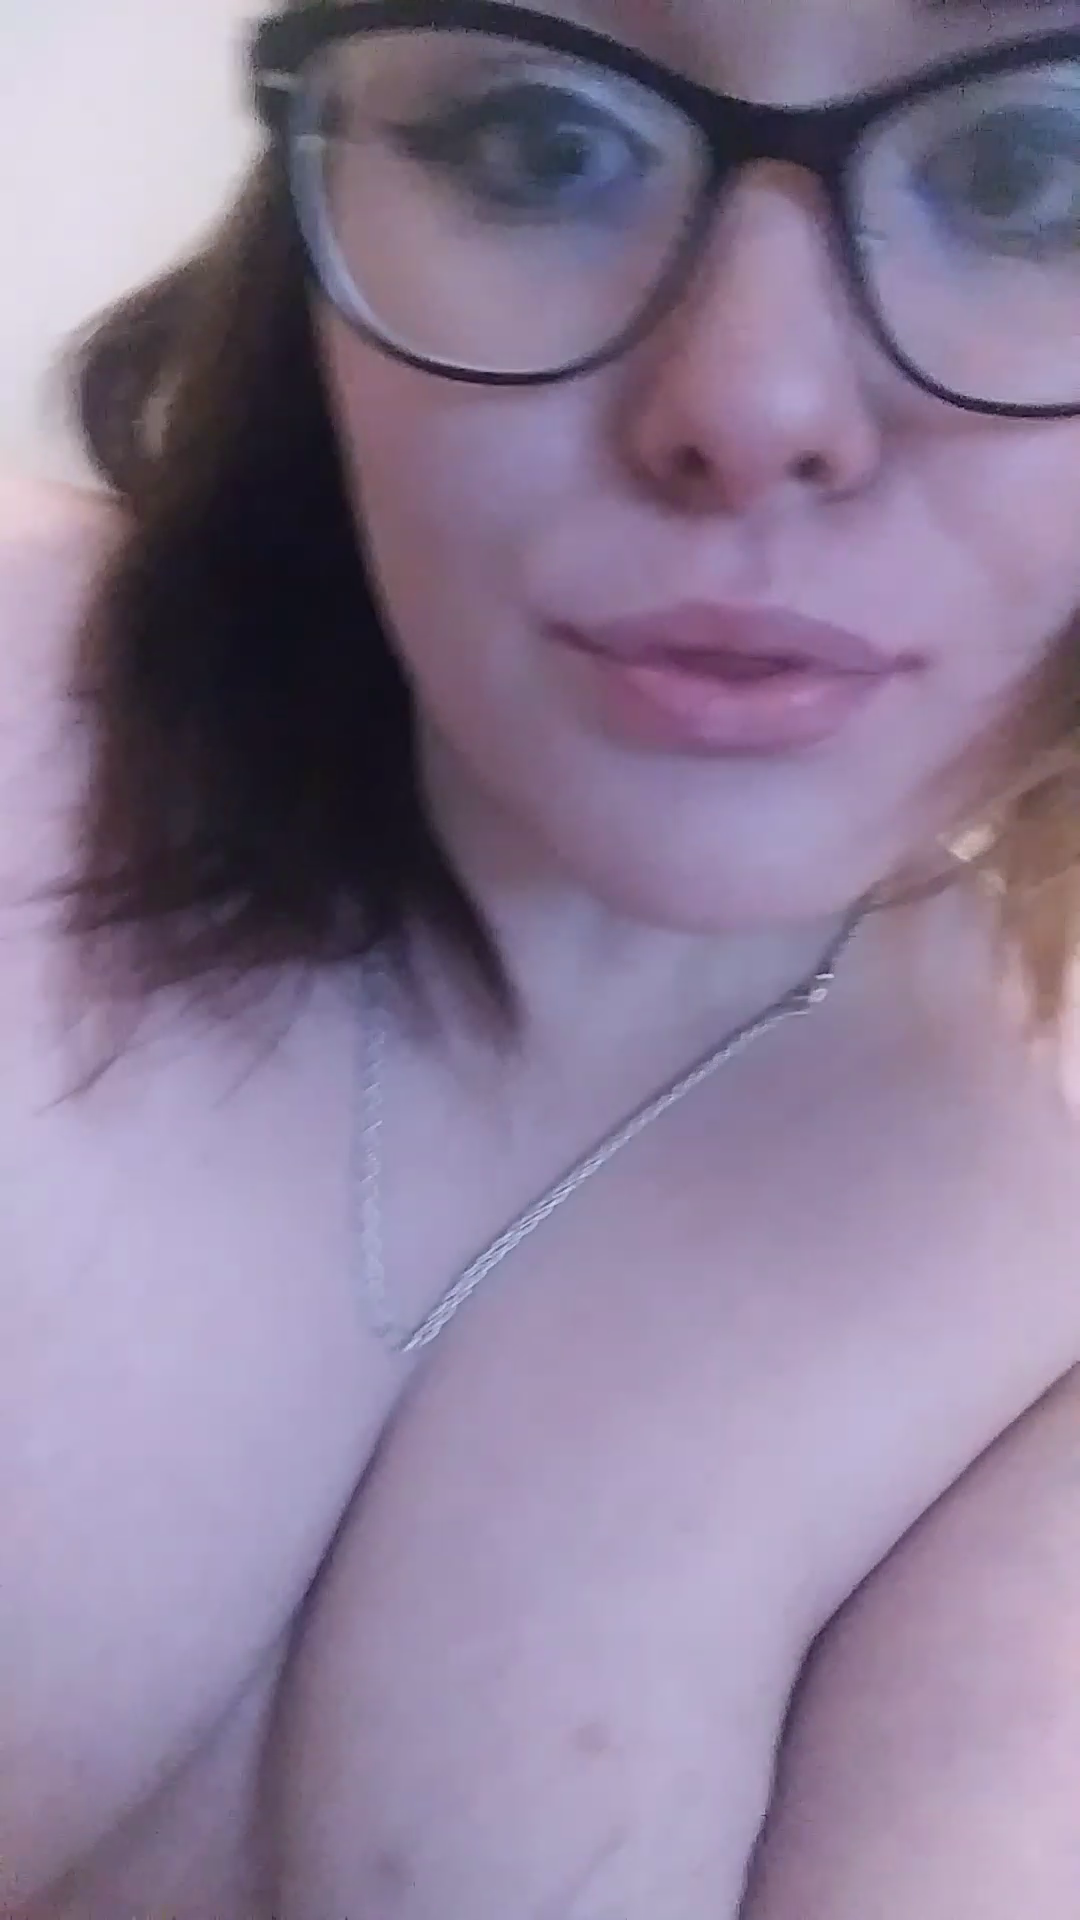 Video post by EmilyRxse